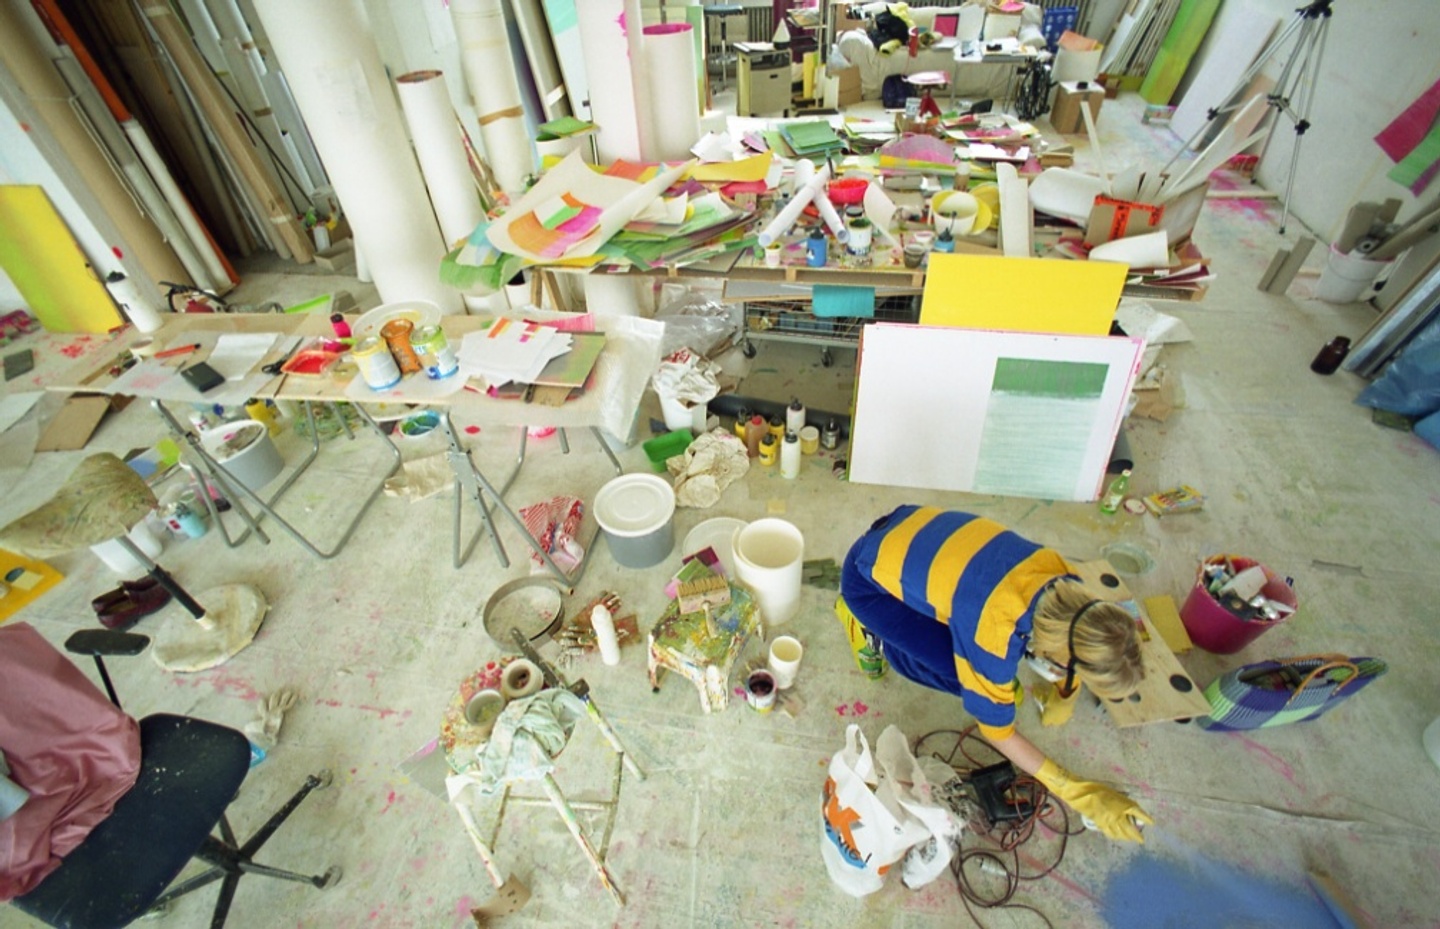 A painter working in a studio, strewn with papers and buckets, spraying blue paint onto the floor